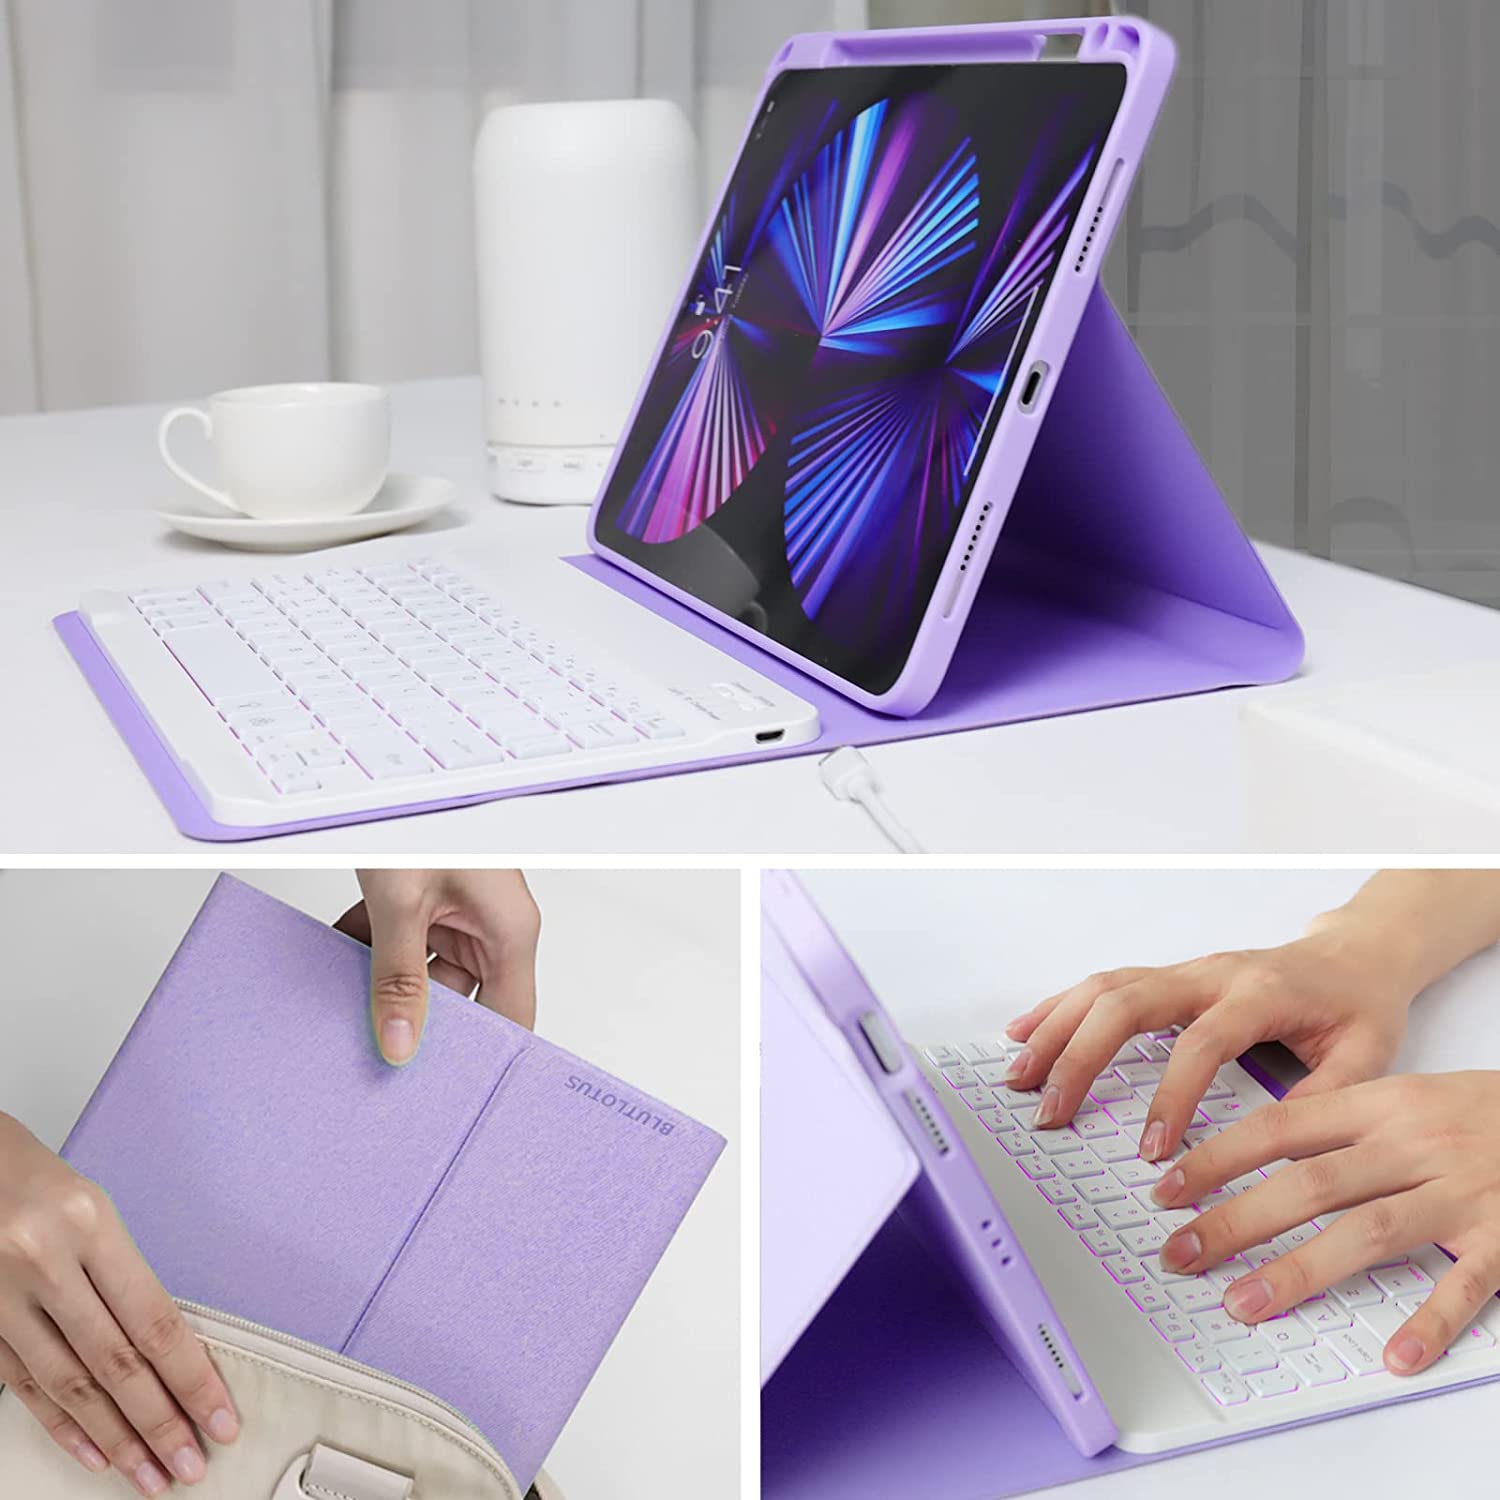 Keyboard Case for iPad Pro 11 inch 4th Generation 2022 / iPad Pro 11 inch 2021&2020&2018, iPad Air 5th/4th Gen, Detachable Bluetooth Keyboard with